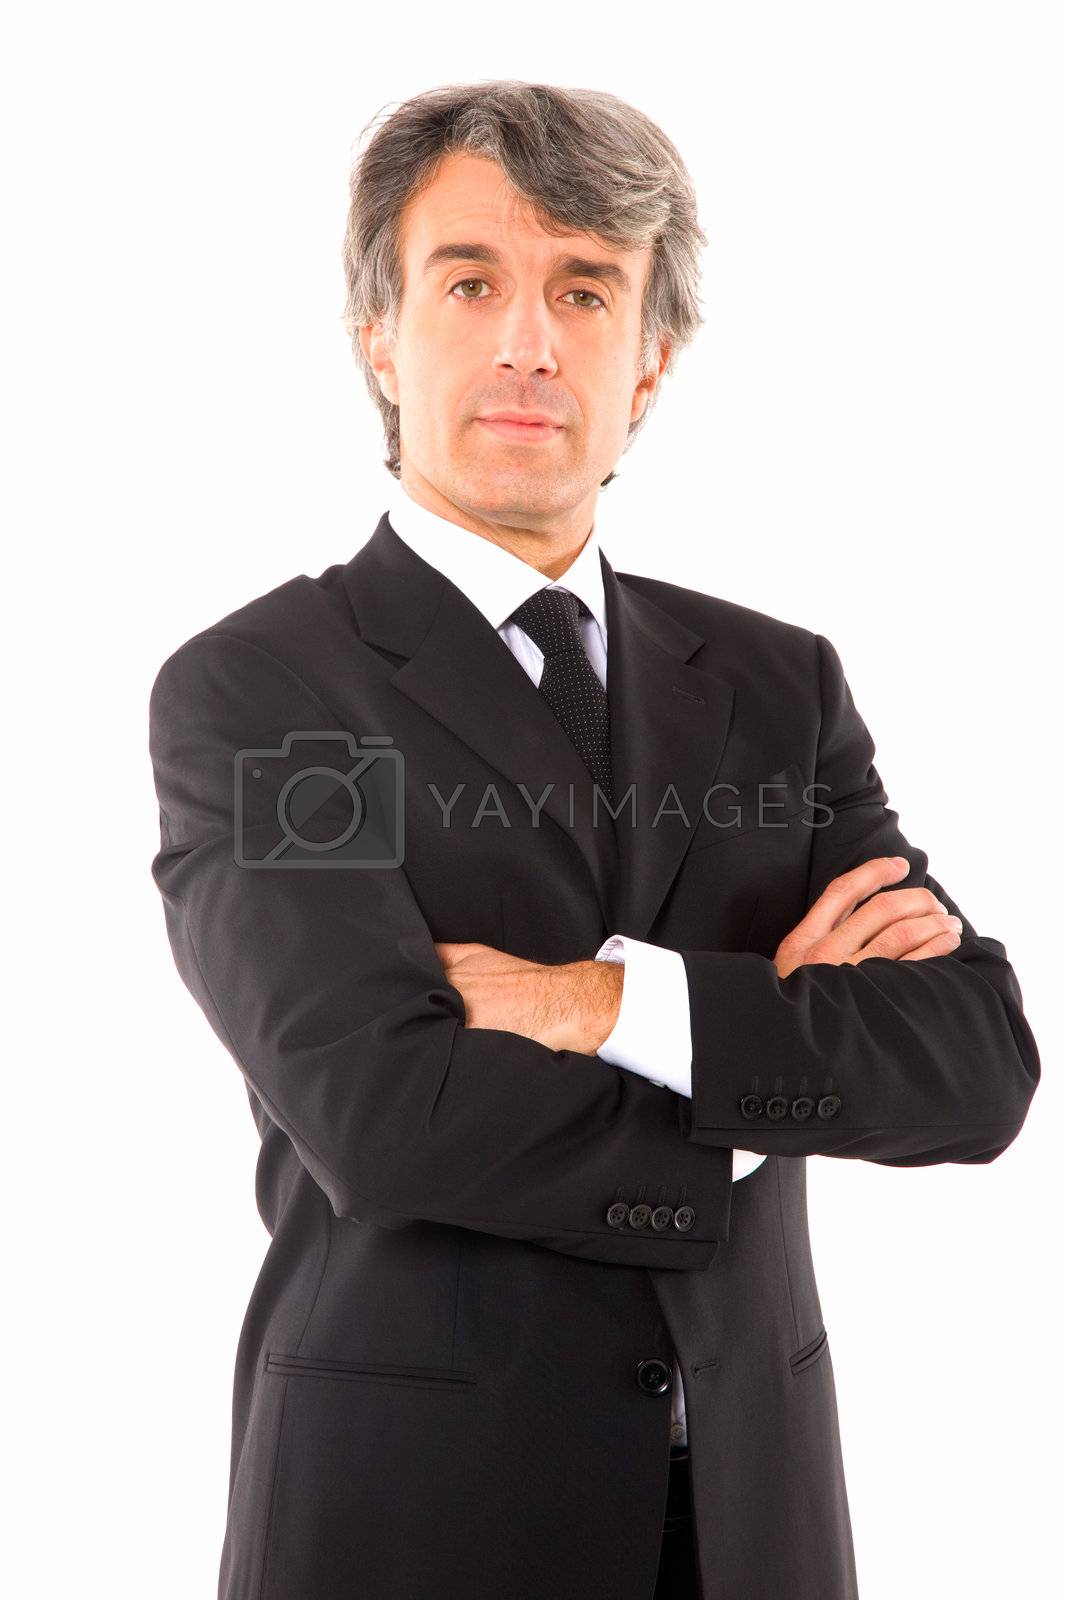 Royalty free image of businessman with arms crossed by ambro